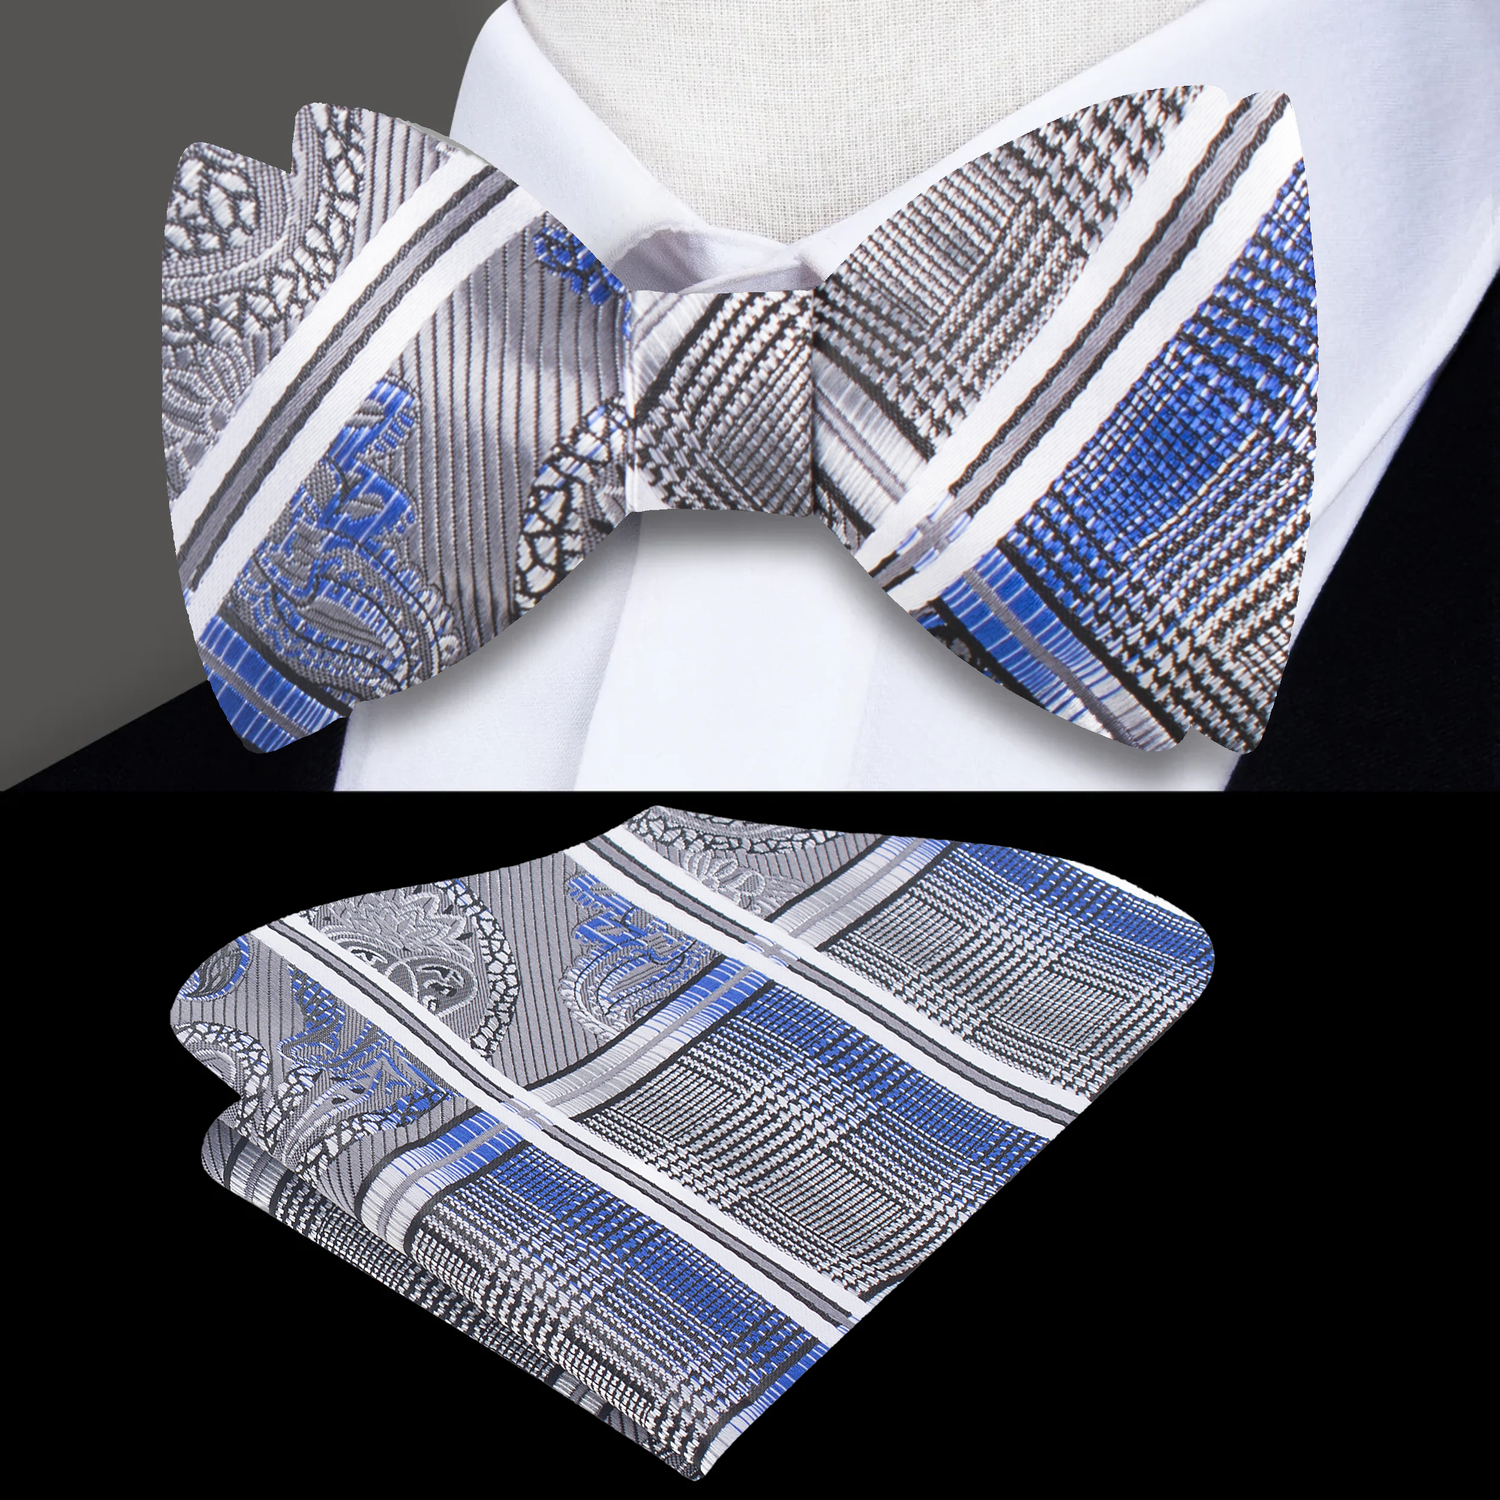 Main: A Silver, Black, Blue Geometric and Paisley Pattern Silk Self Tie Bow Tie, Matching Pocket Square